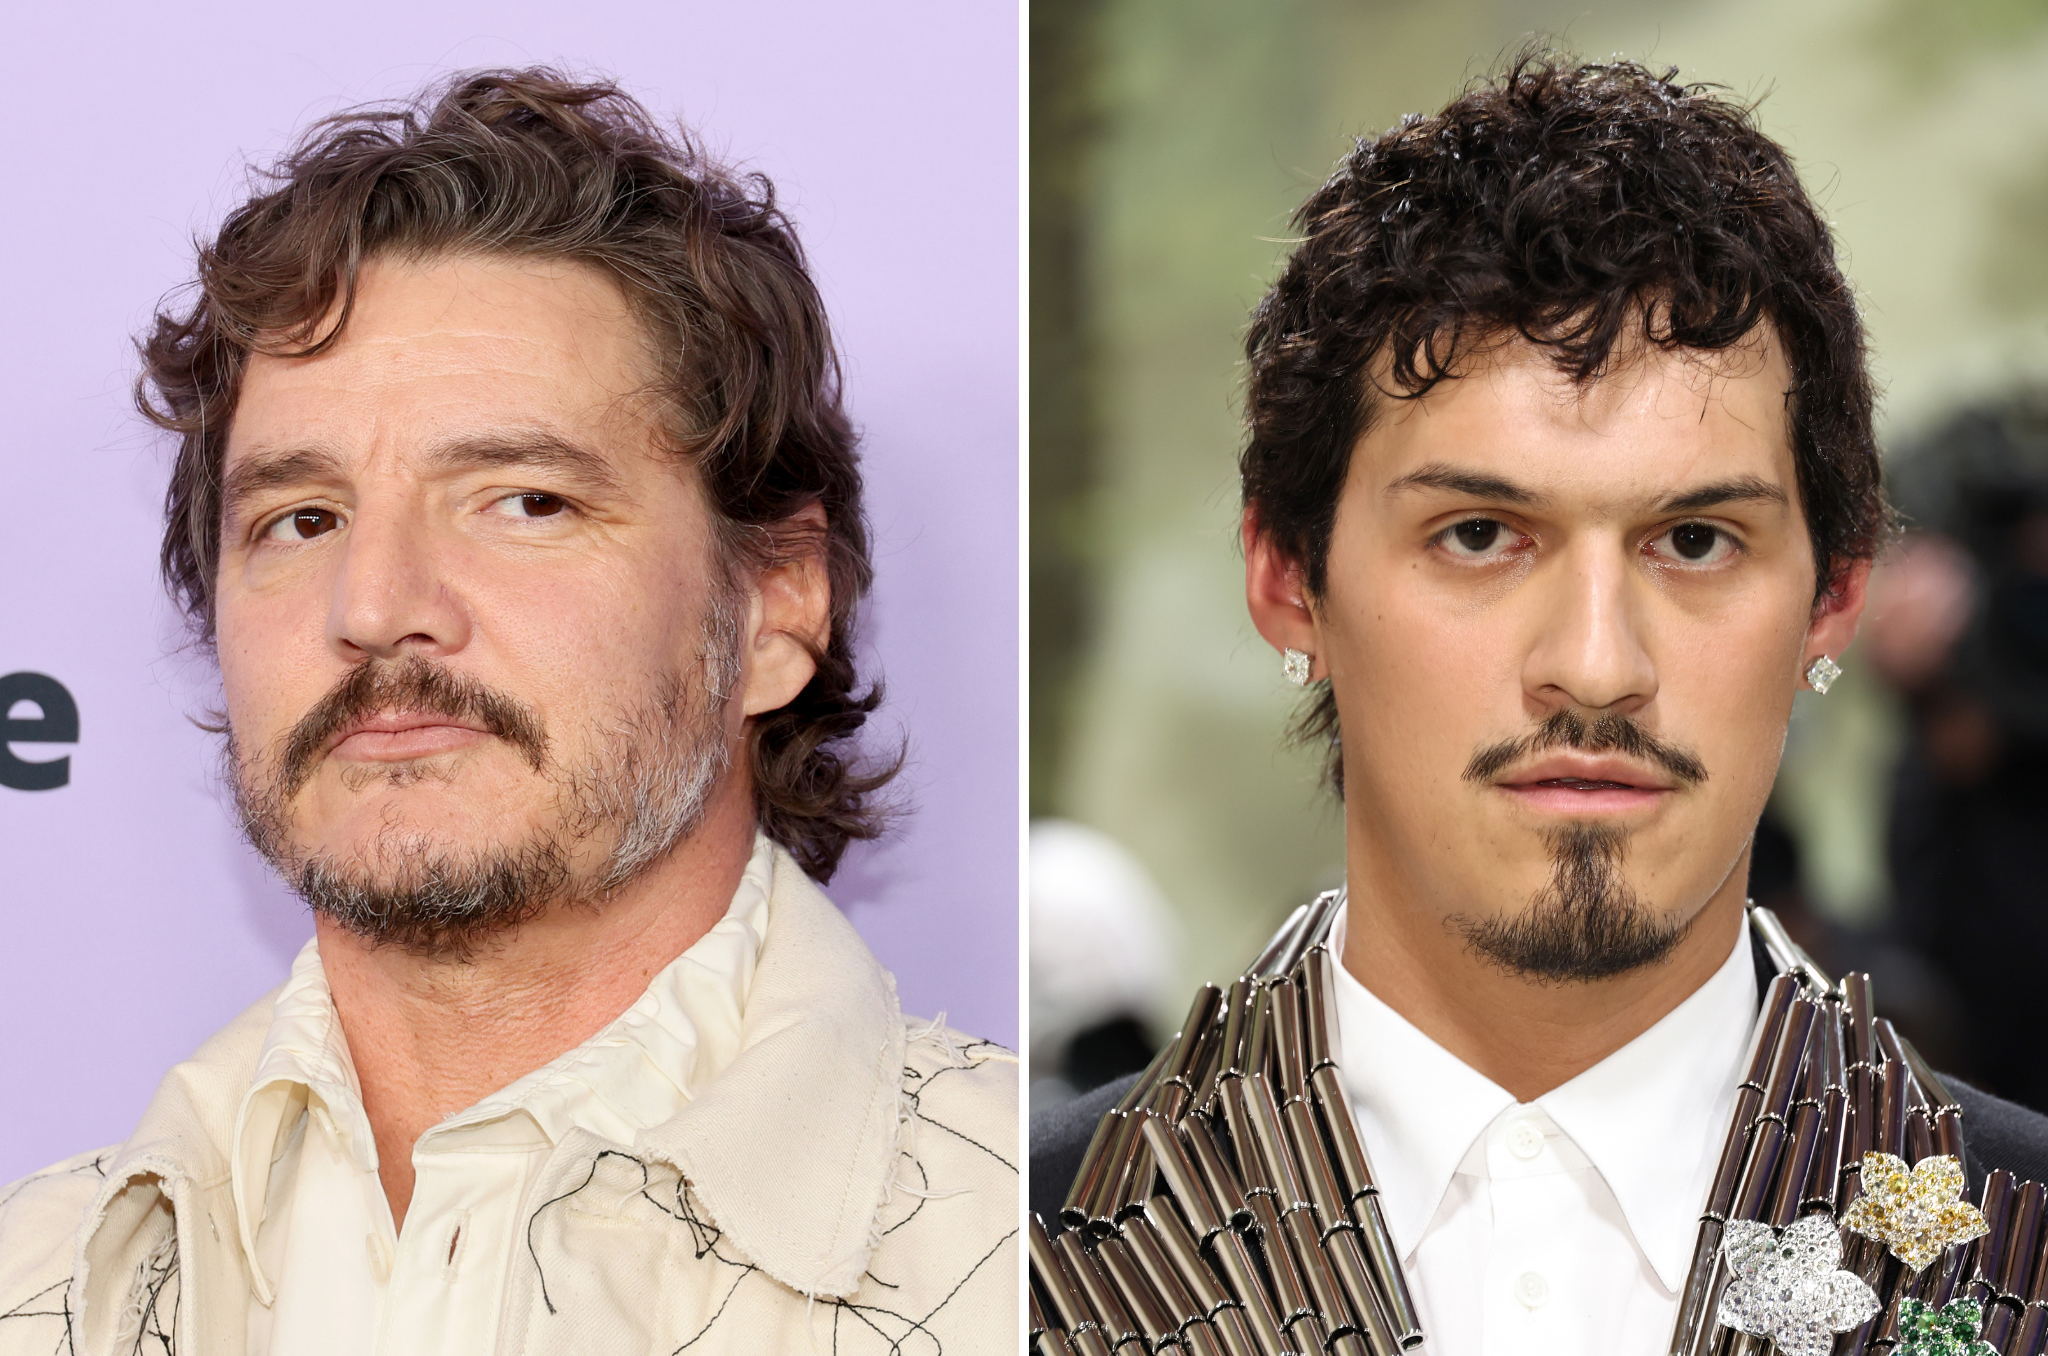 pedro pascal, the last of us, pedro pascal opens up about ‘shattering’ heartbreak in omar apollo song: ‘can’t believe i’m sending you this’